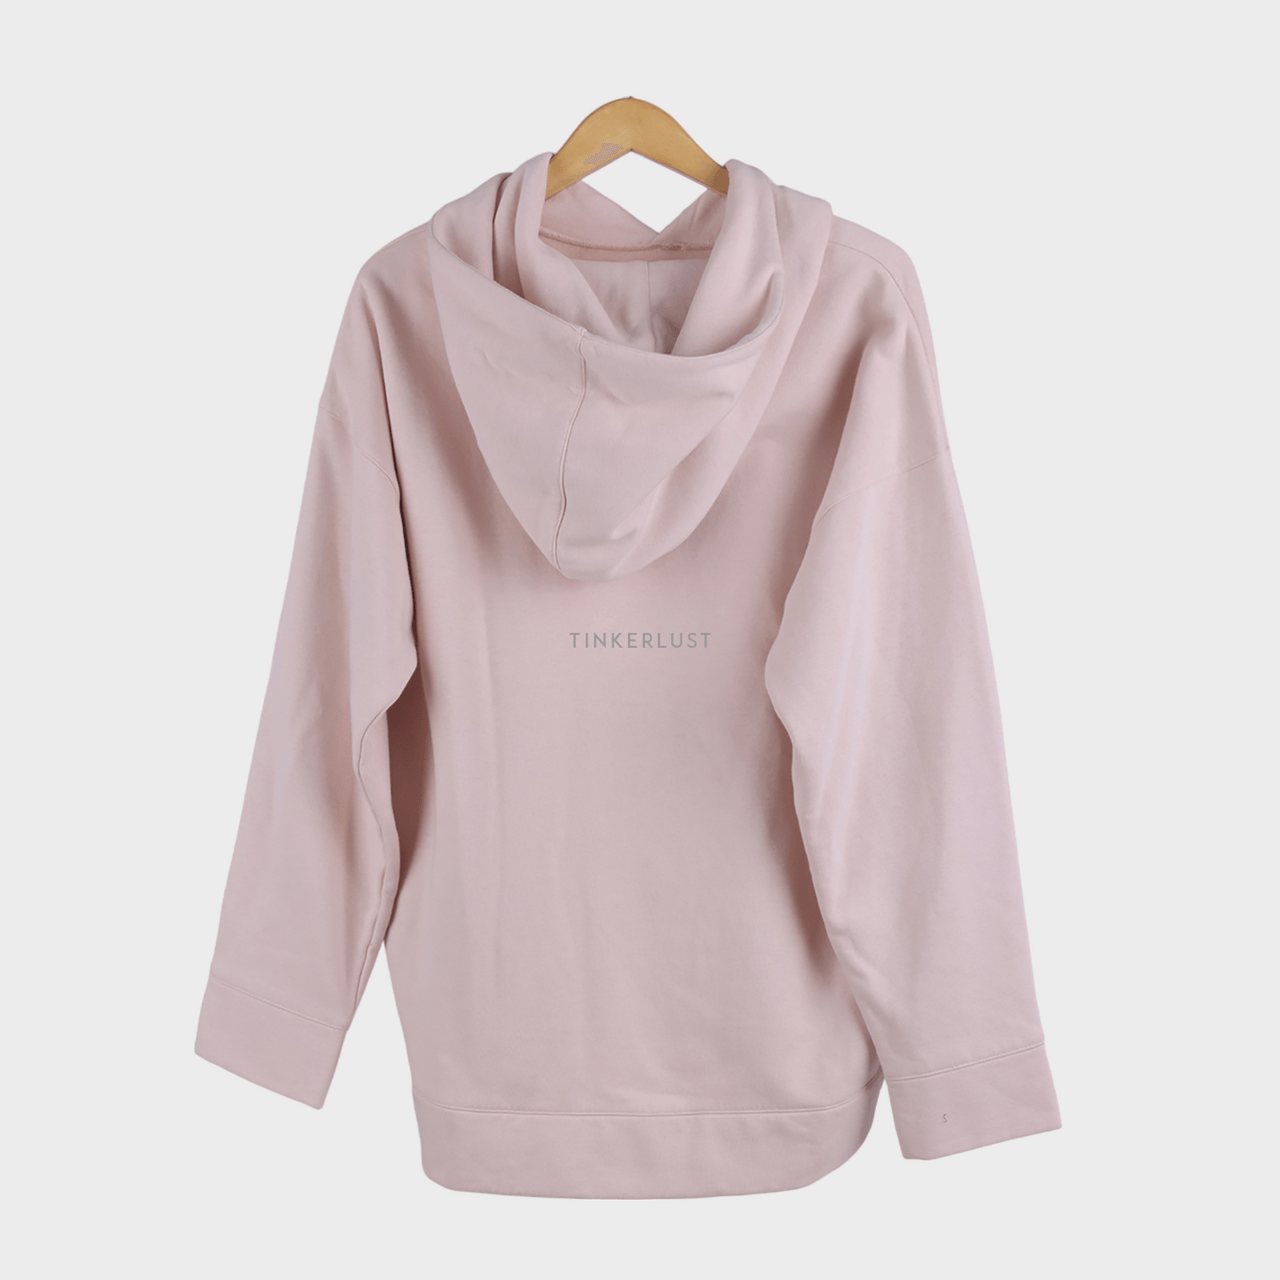 H&M Soft Pink Sweater with Hoodie